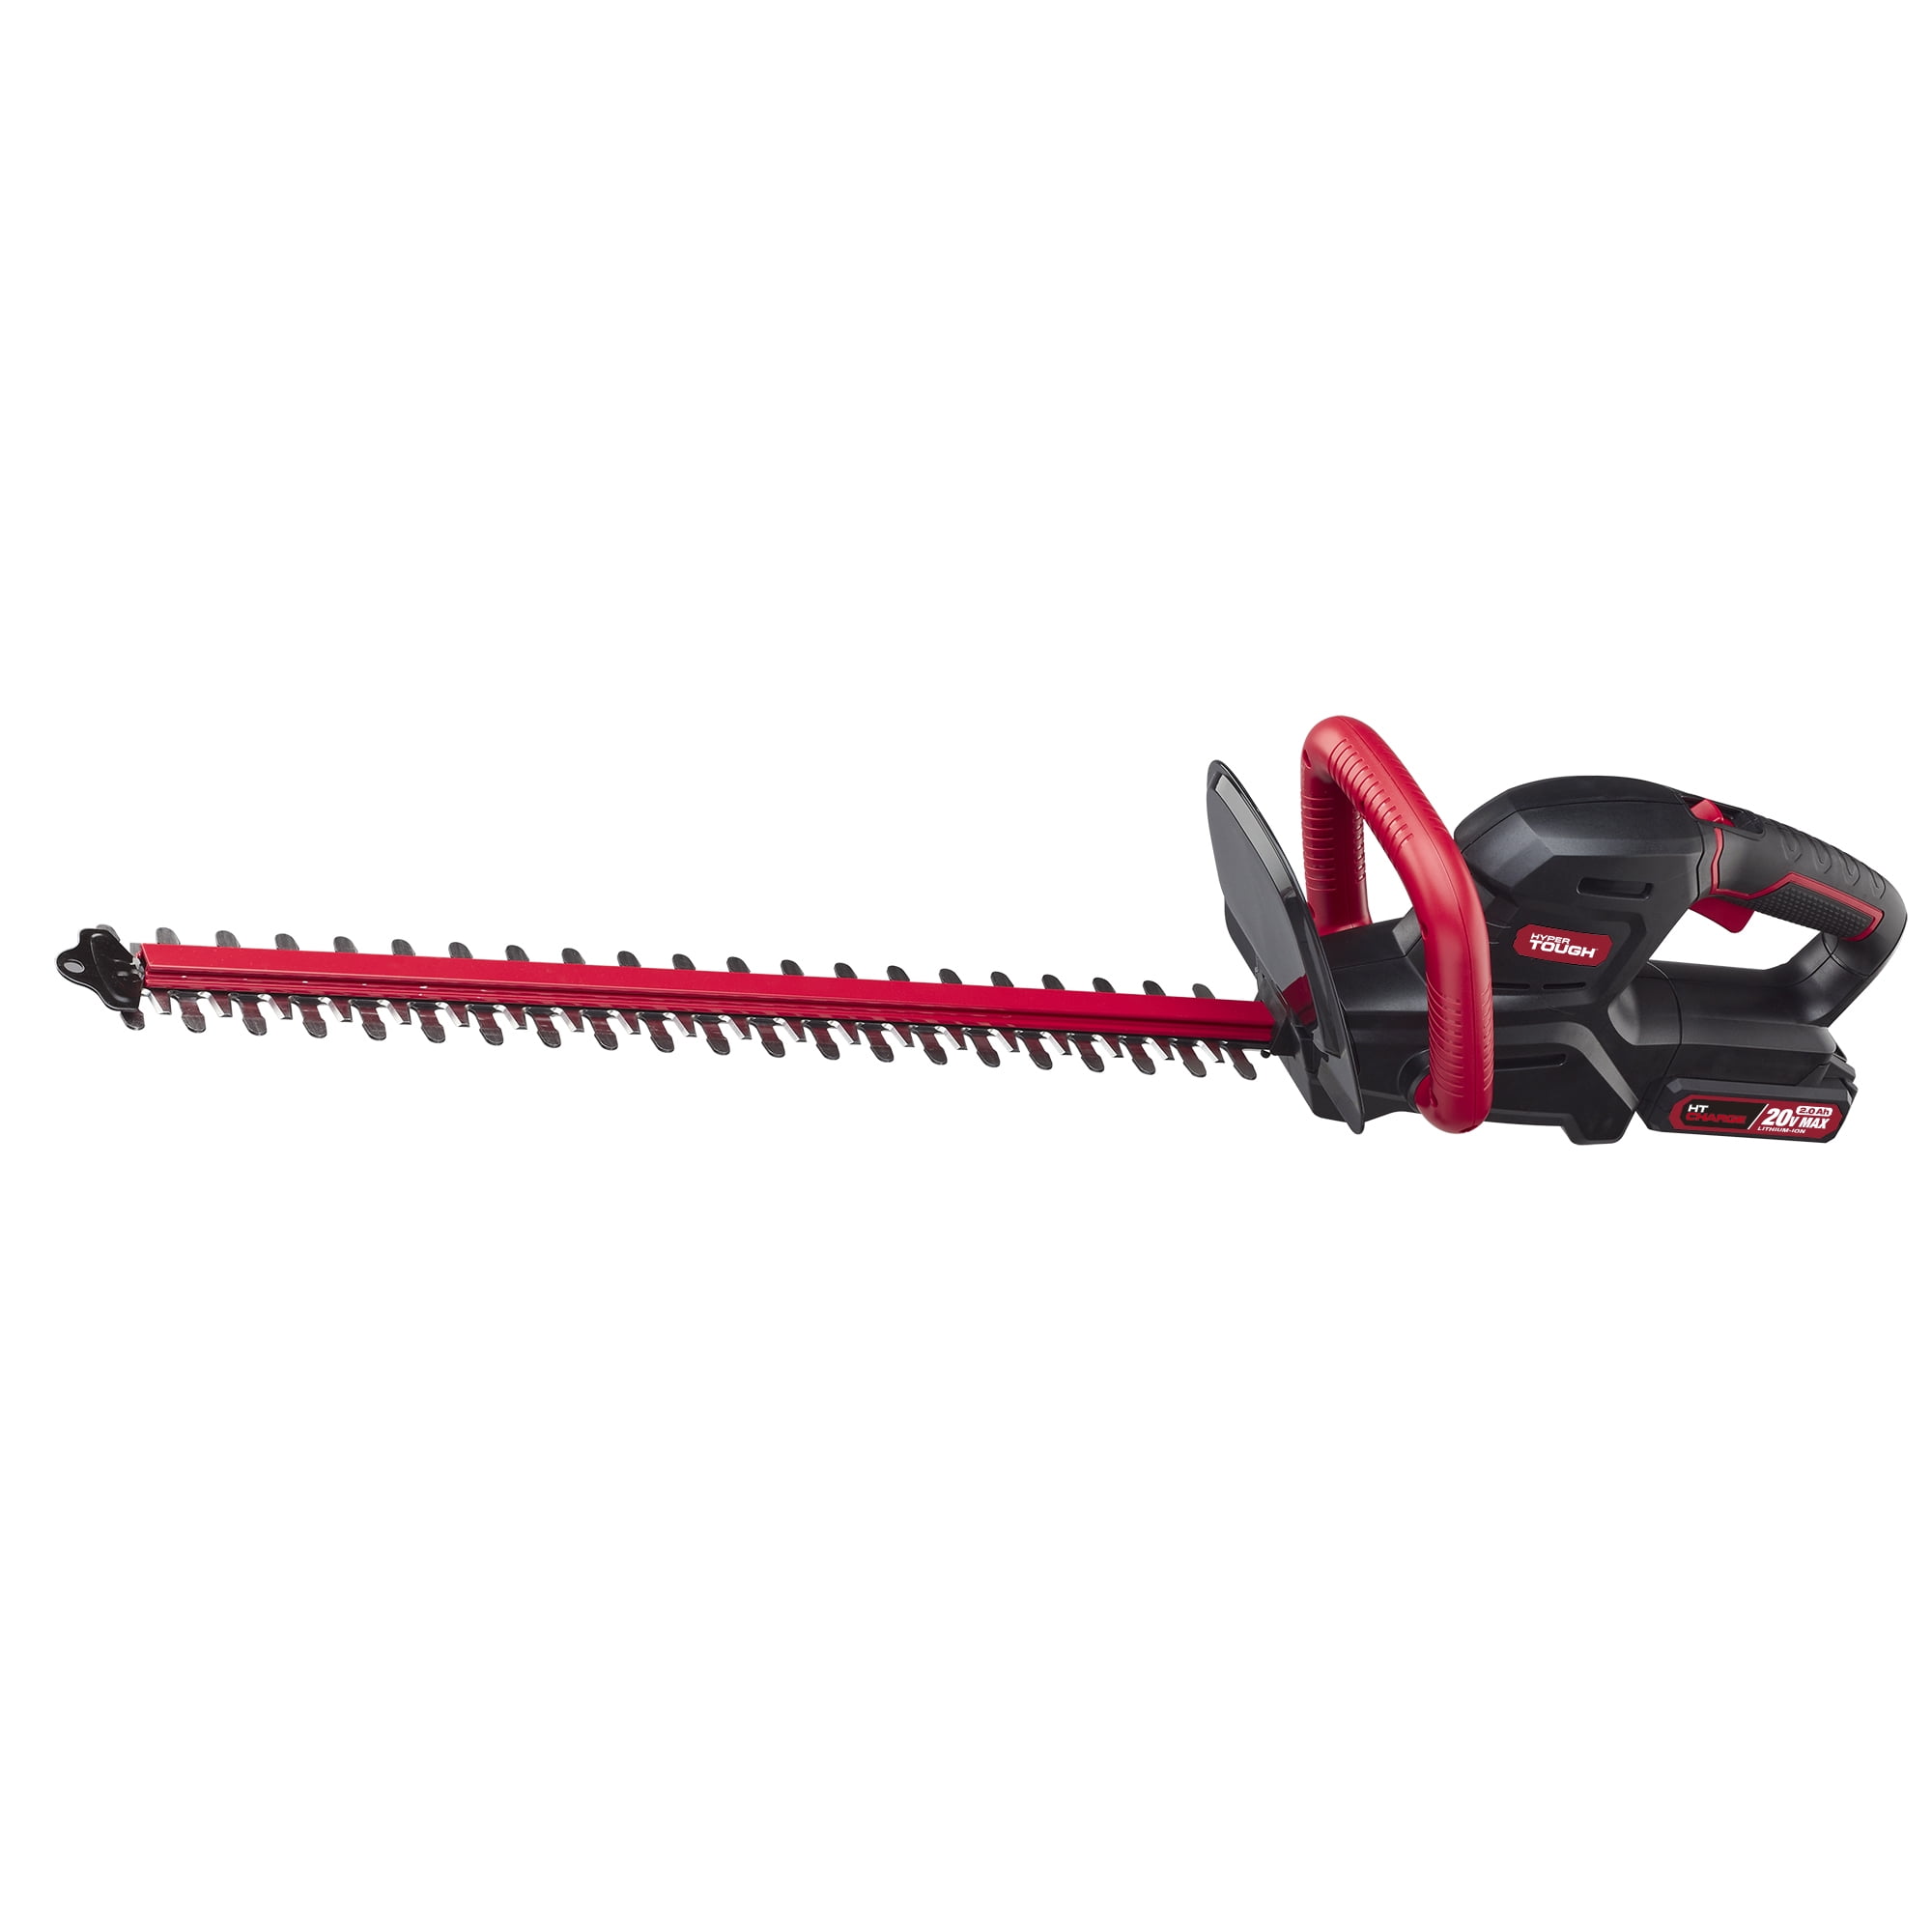 Hyper Tough 20V Max Cordless 22-inch Hedge Trimmer, 2.0Ah Battery and  Charger Included, HT21-401-003-07 